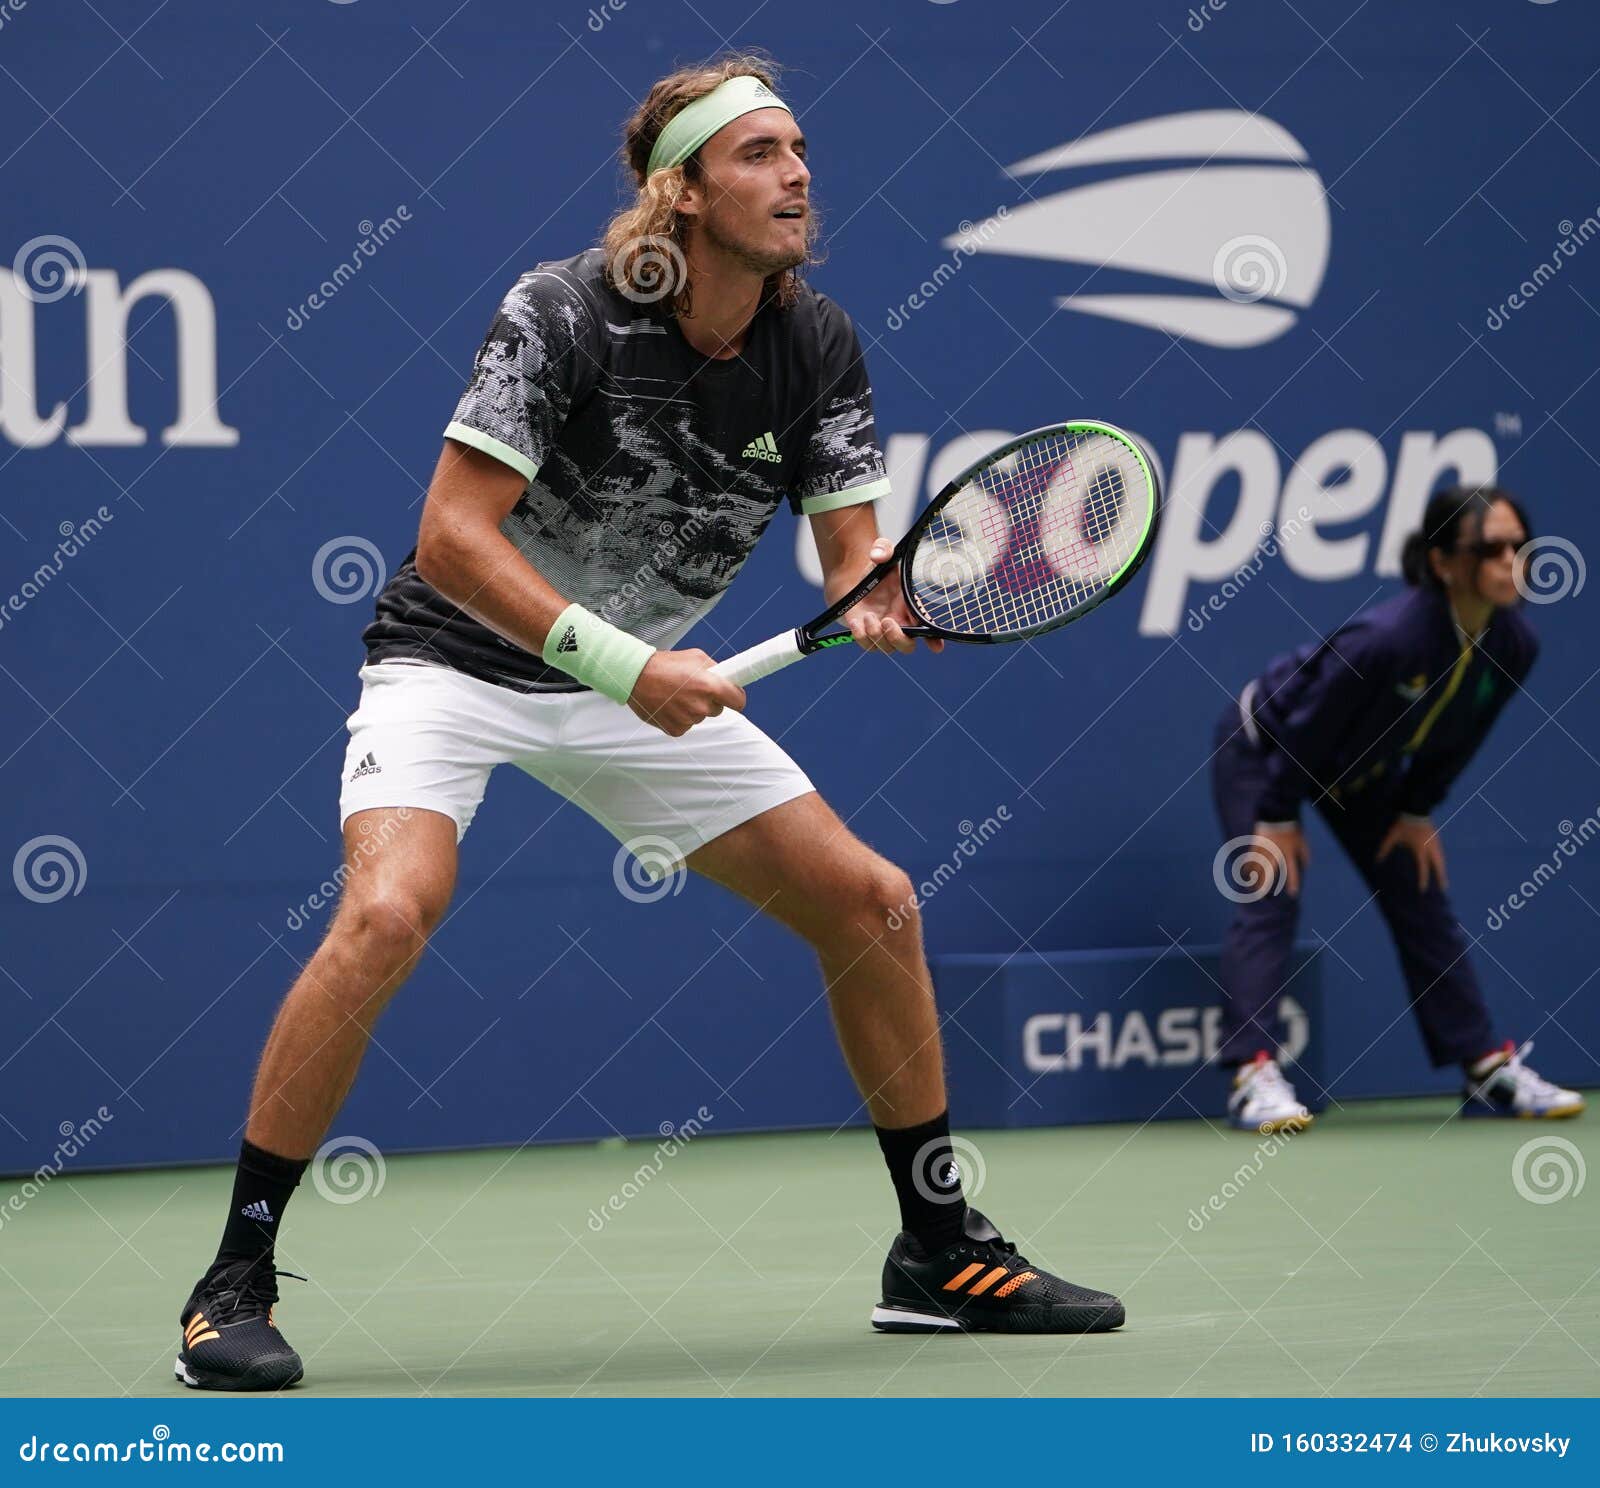 Professional Tennis Player Stefanos Tsitsipas of Greece in Action during His 2019 US Open First Round Match Editorial Stock Image - Image of jean, 160332474